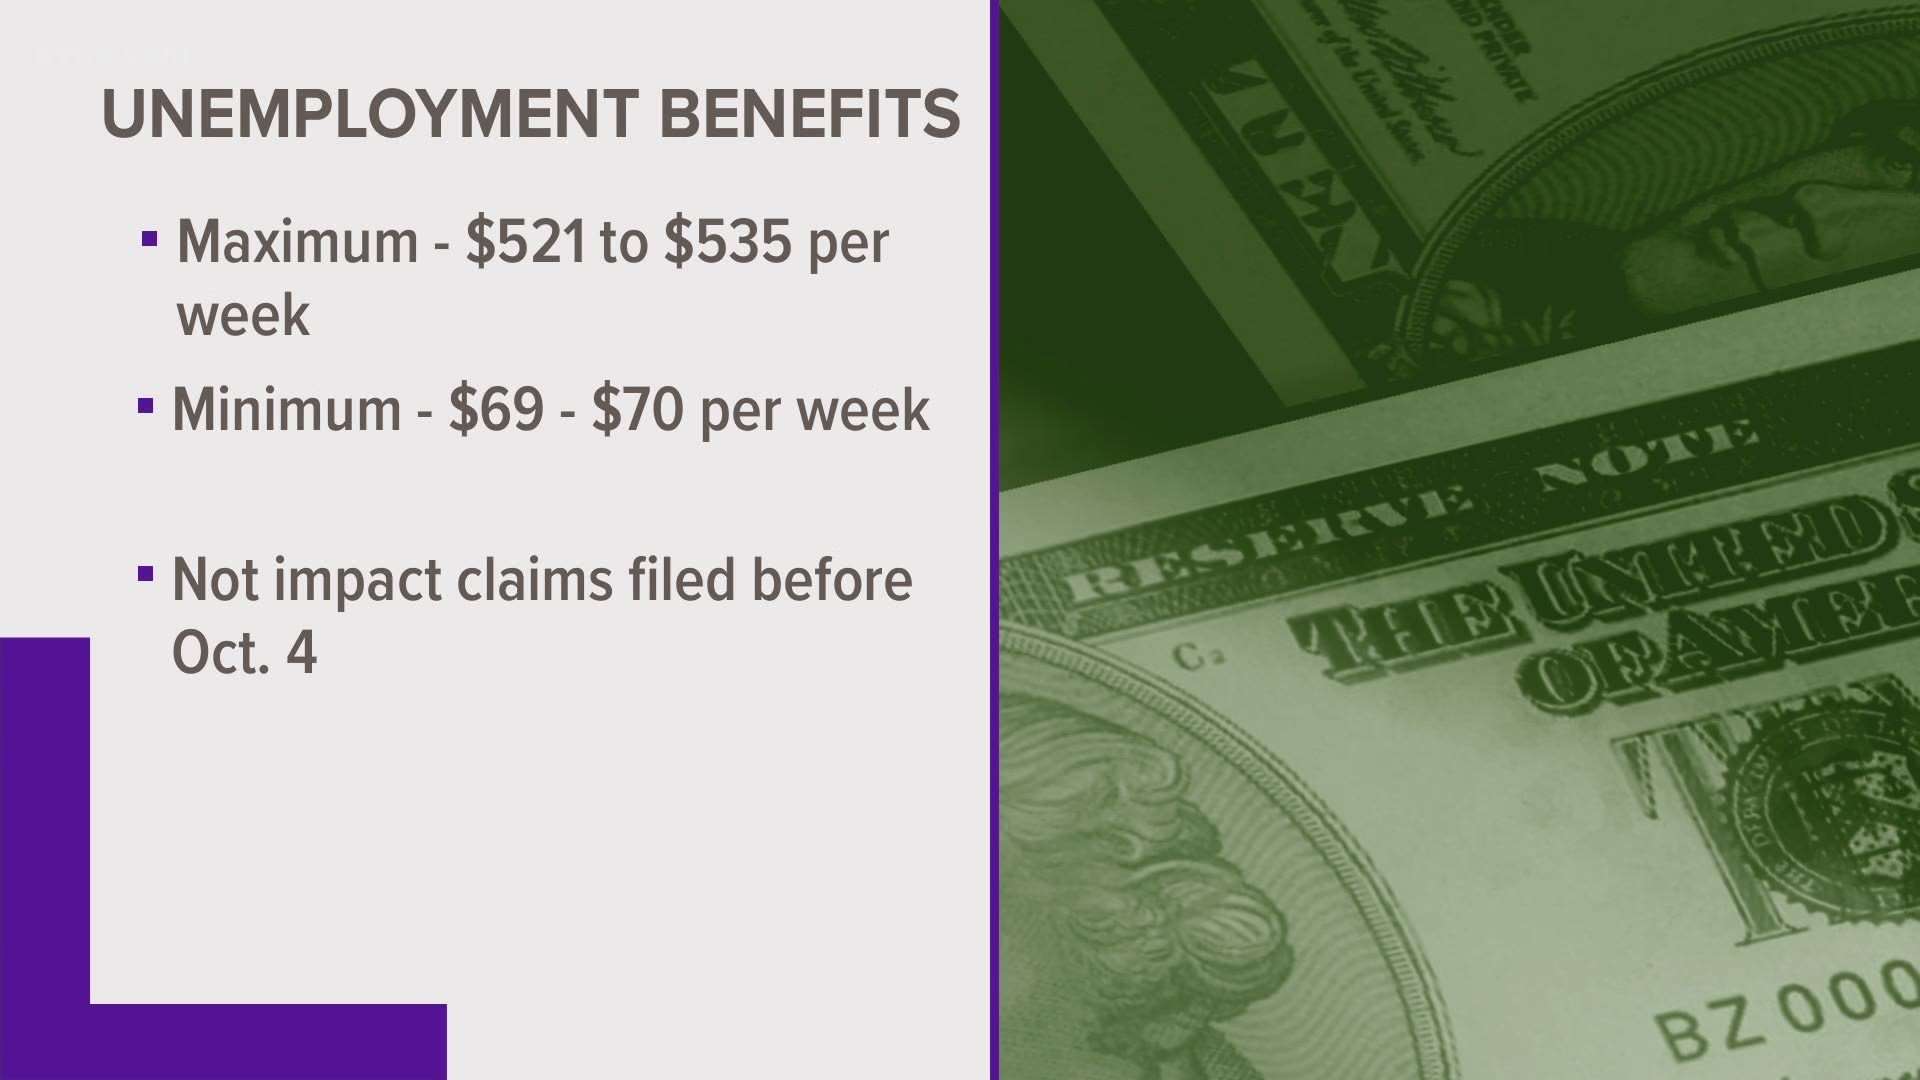 Texas unemployment benefits to increase